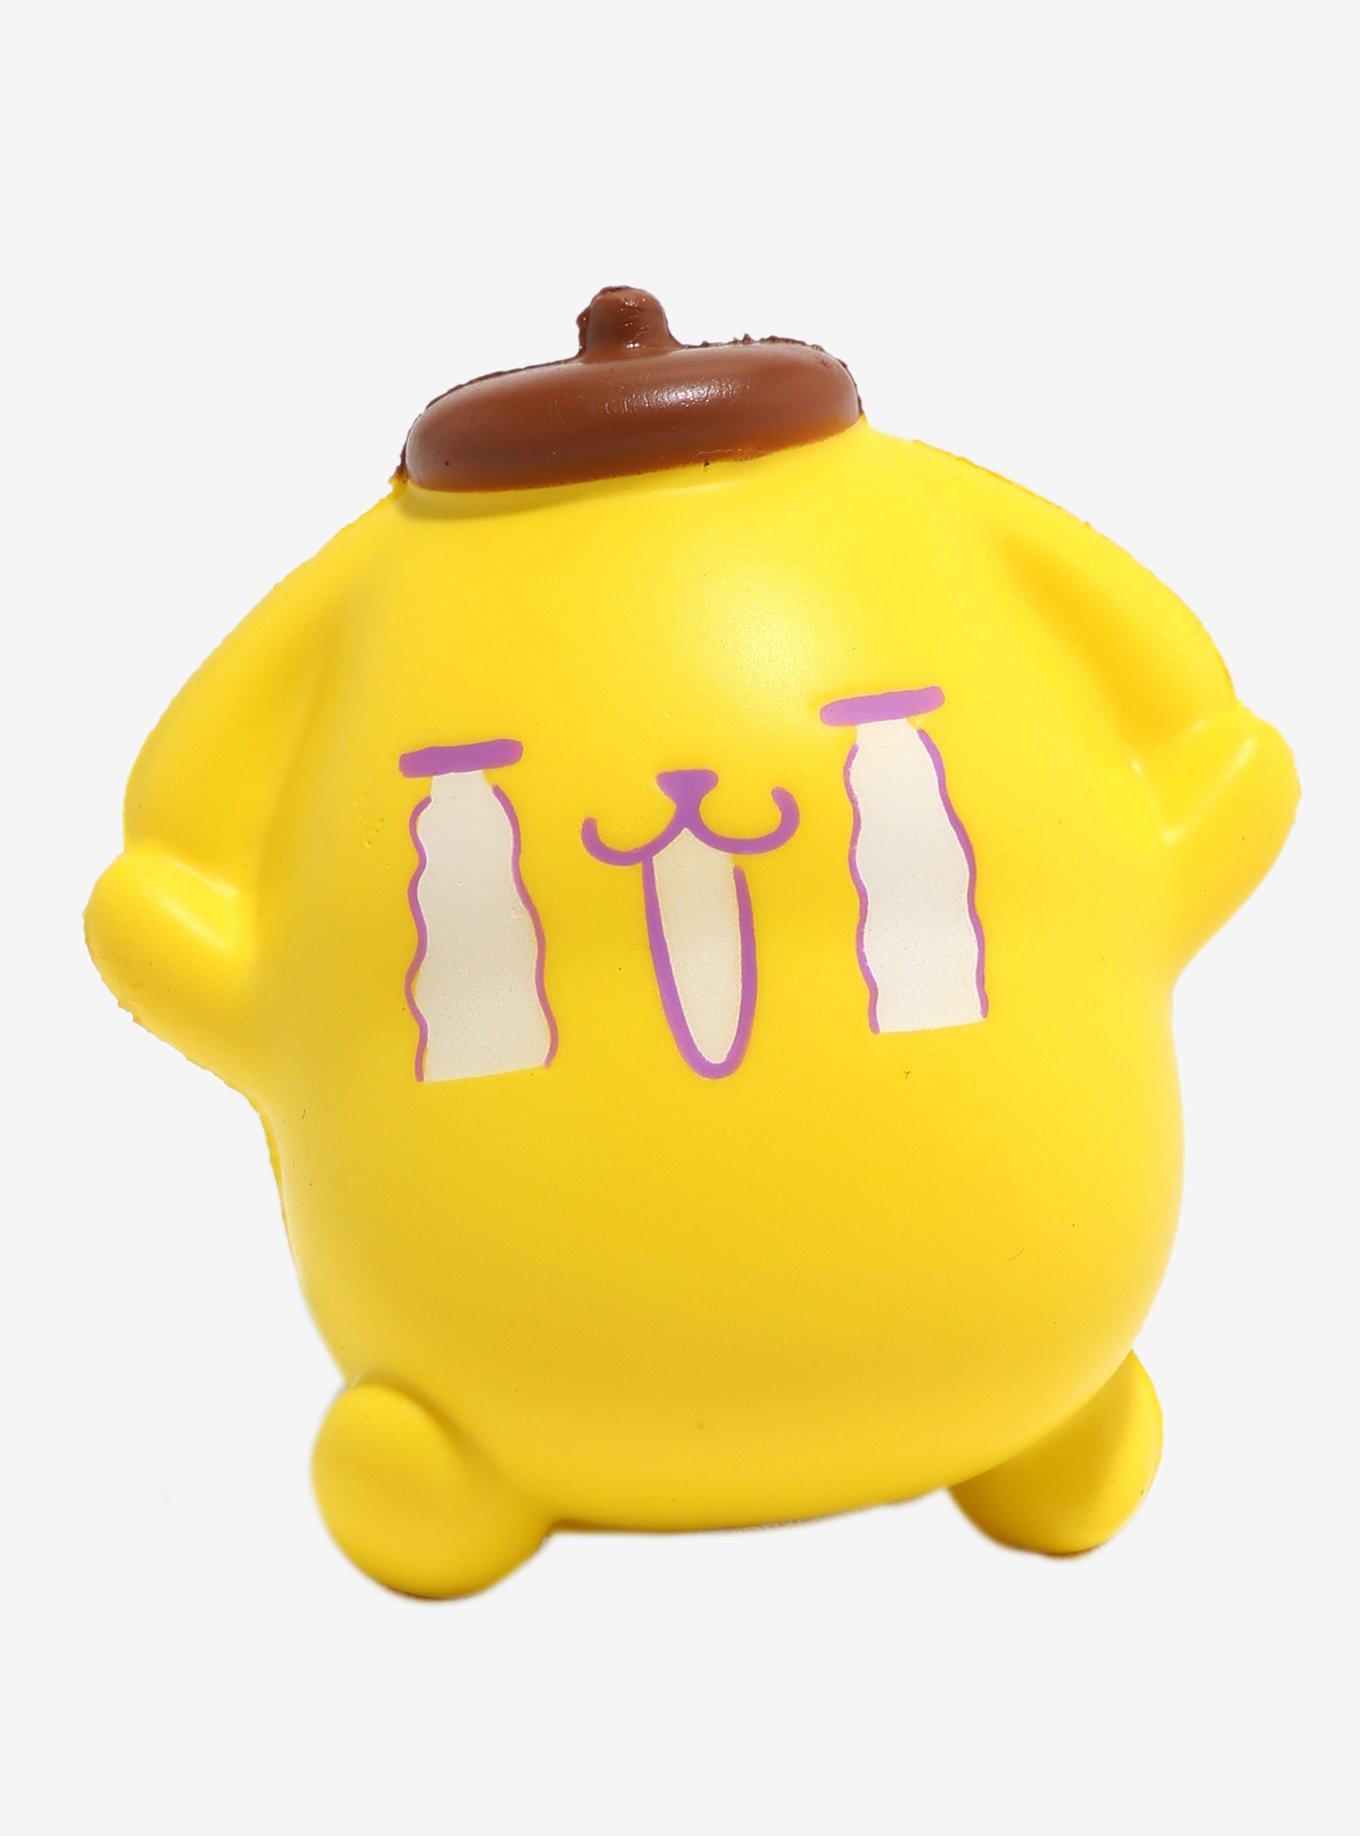 Sanrio Pompompurin Crying Figural Stress Toy, , hi-res